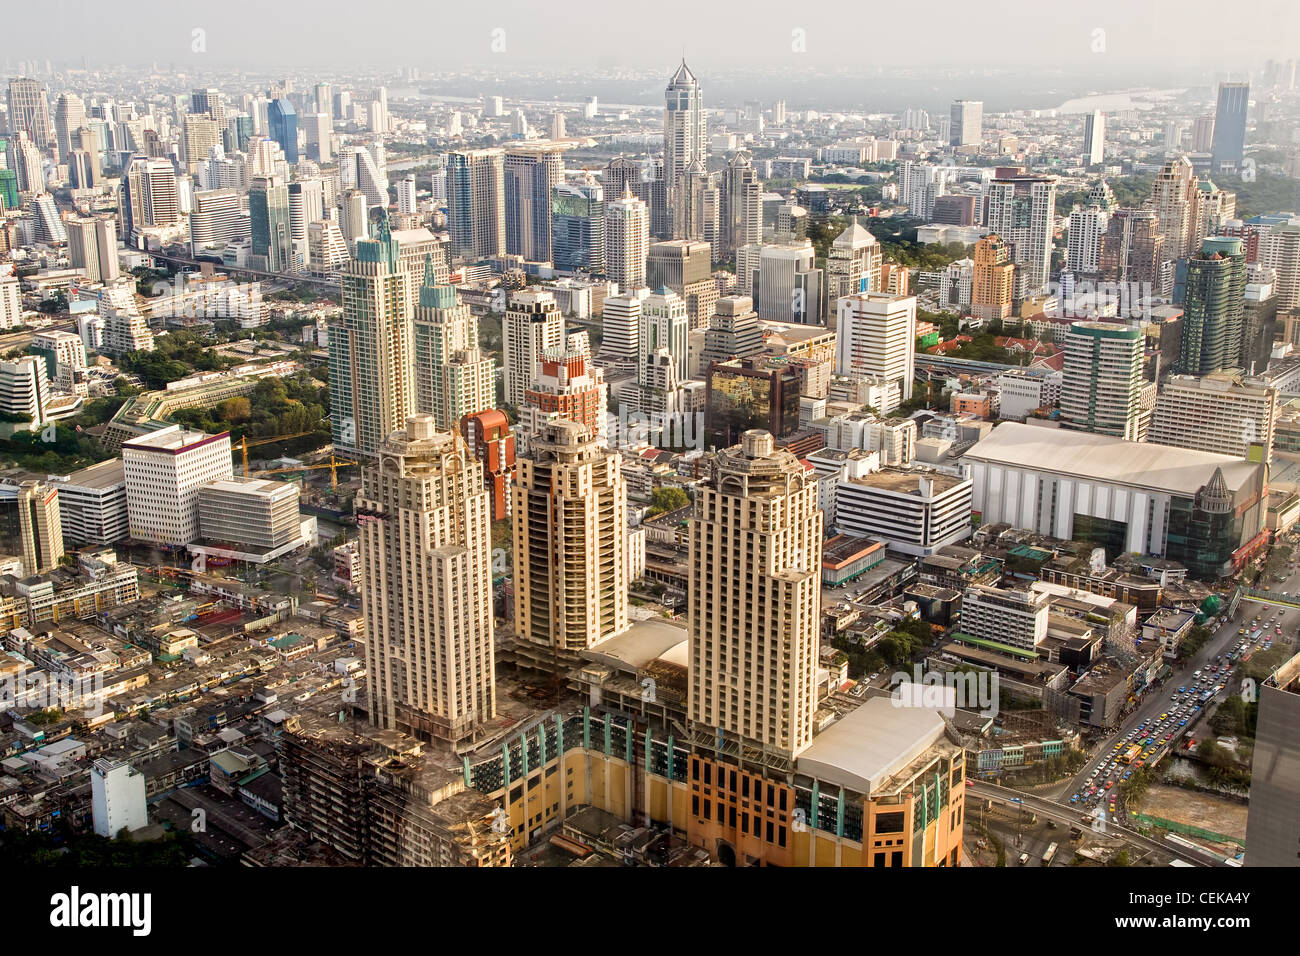 Bangkok Metropolis, aerial view over the biggest city in Thailand Stock Photo